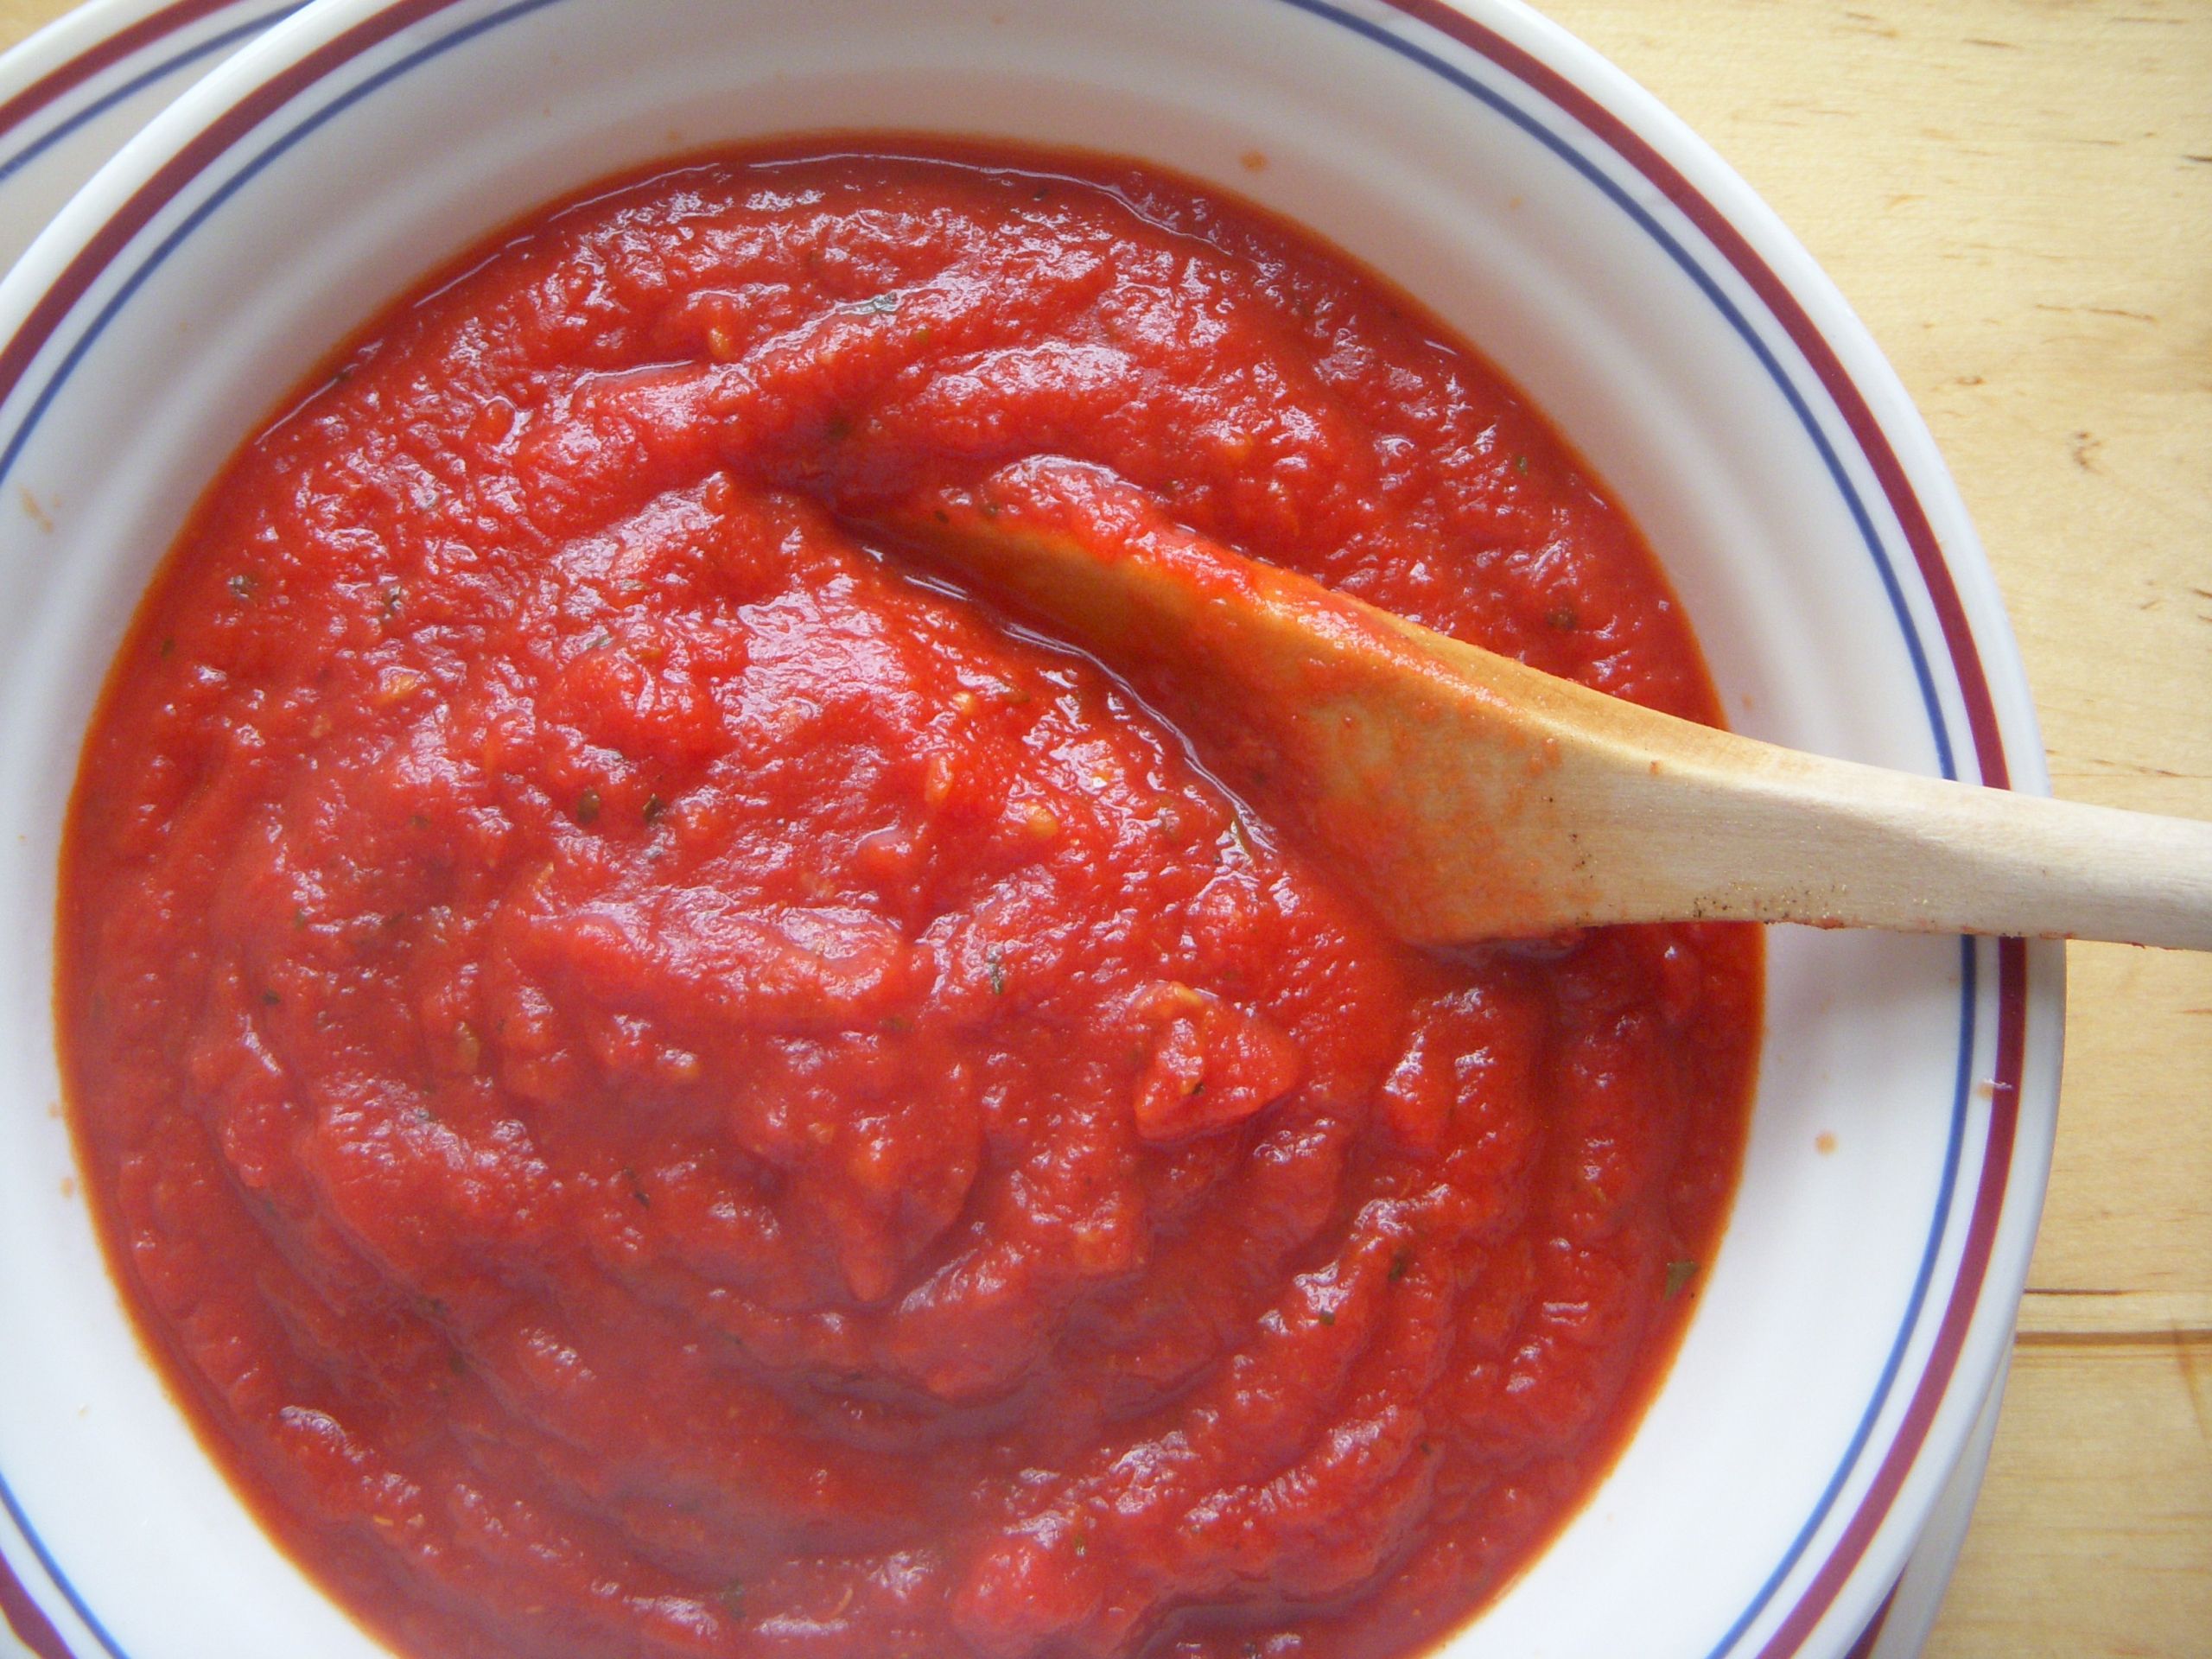 Pizza Sauce Recipe For Canning
 pizza sauce from fresh tomatoes for canning